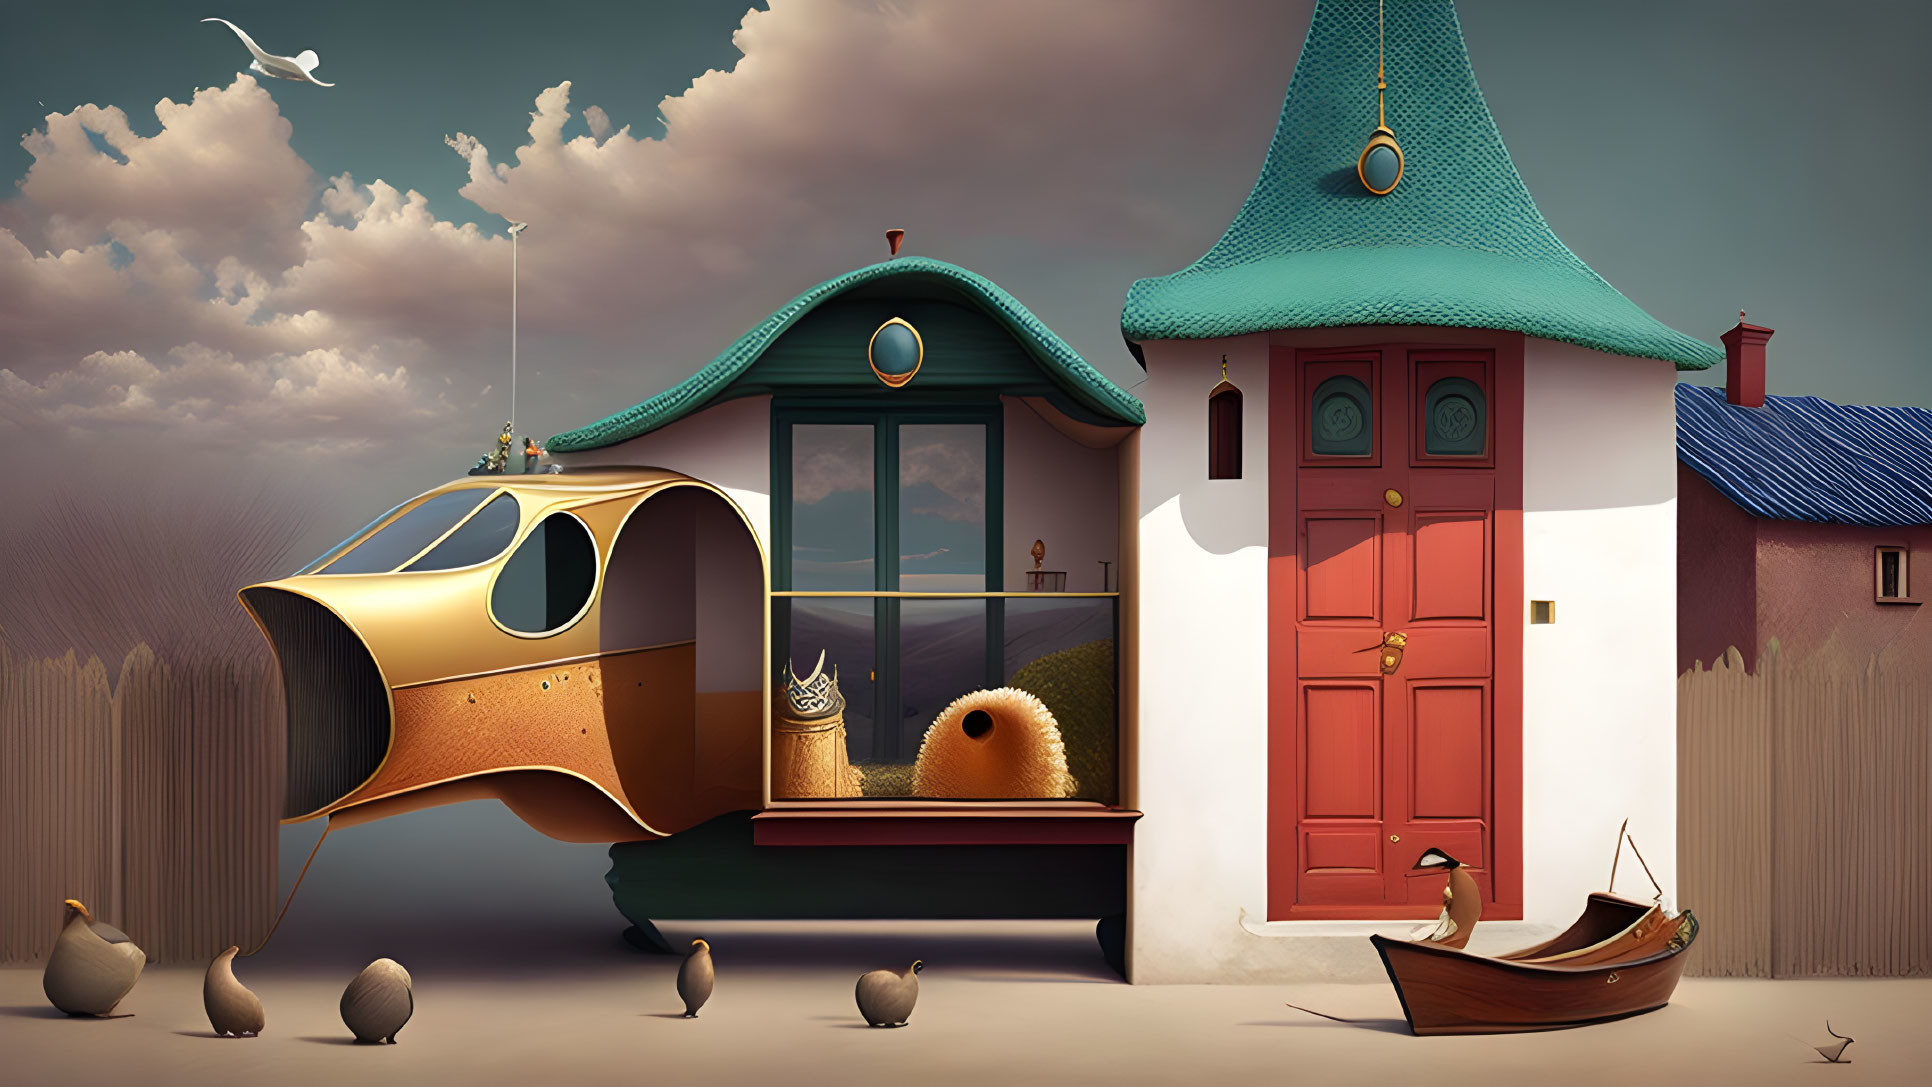 Whimsical house with copper plane, seagulls, ducks, and wooden boat